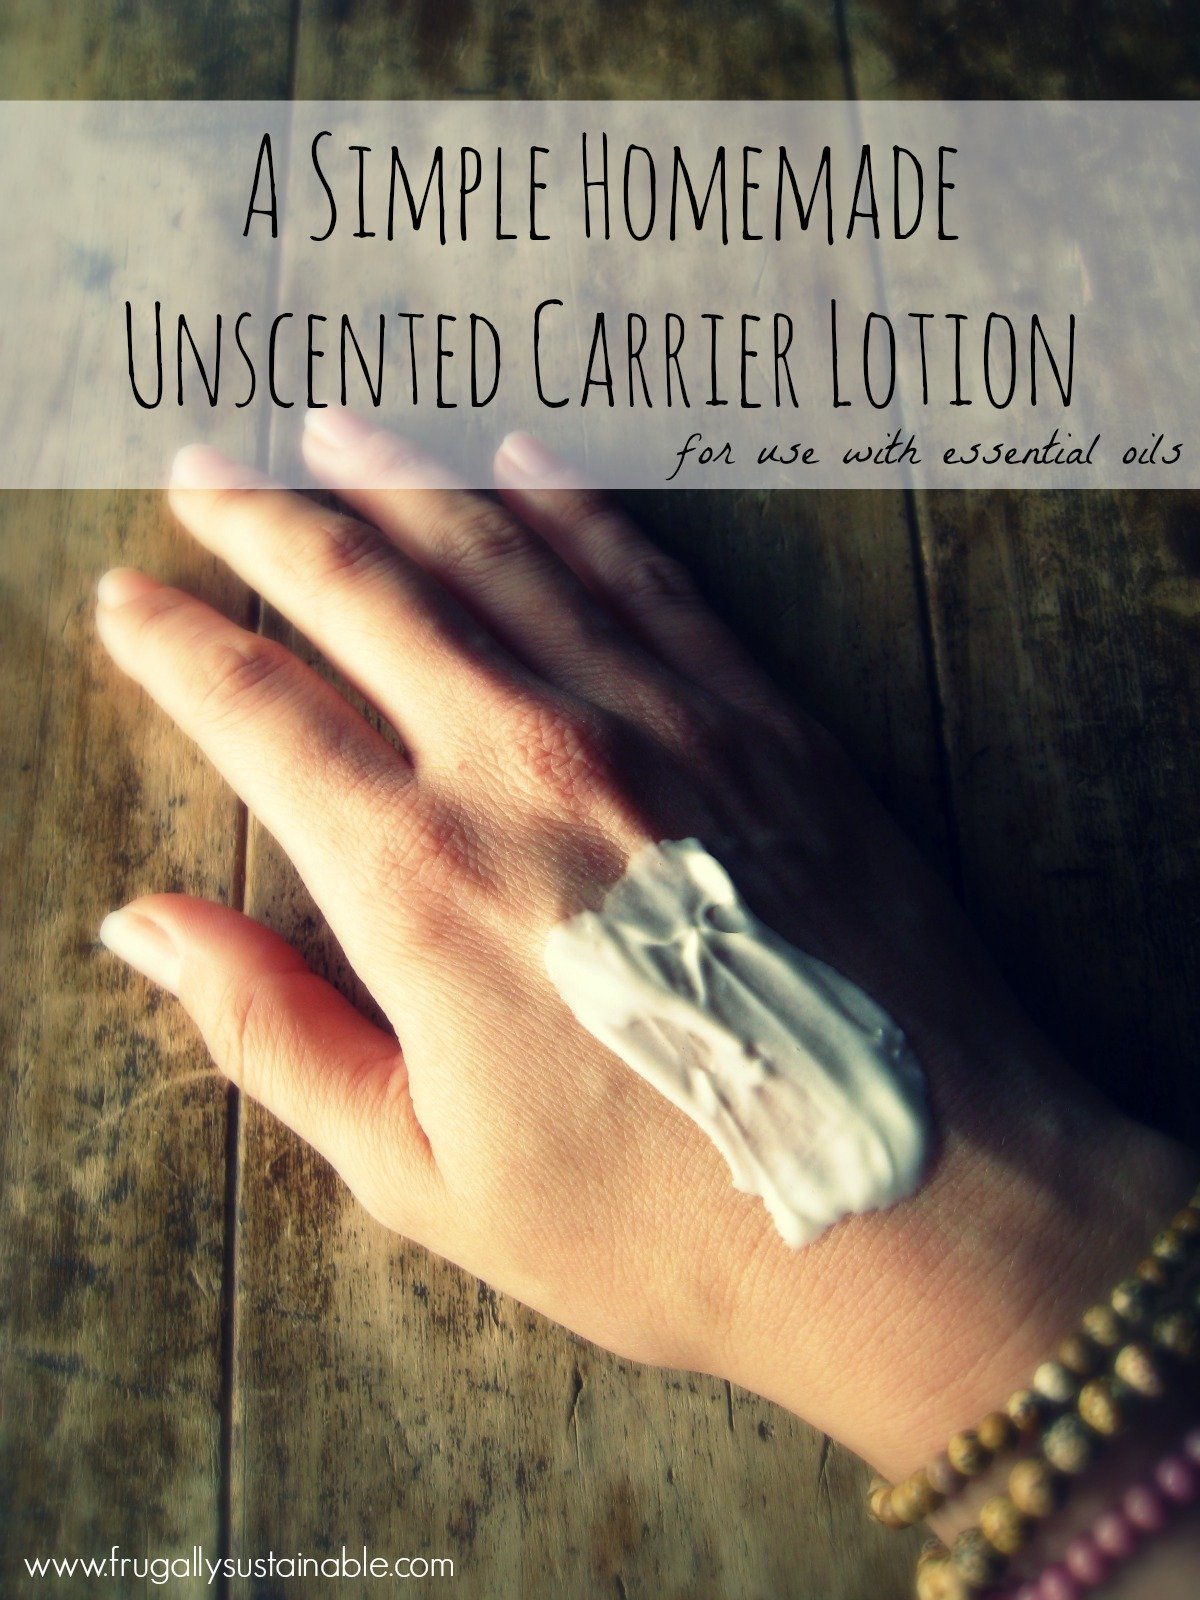 A super simple recipe for homemade unscented carrier lotion for use with essential oils